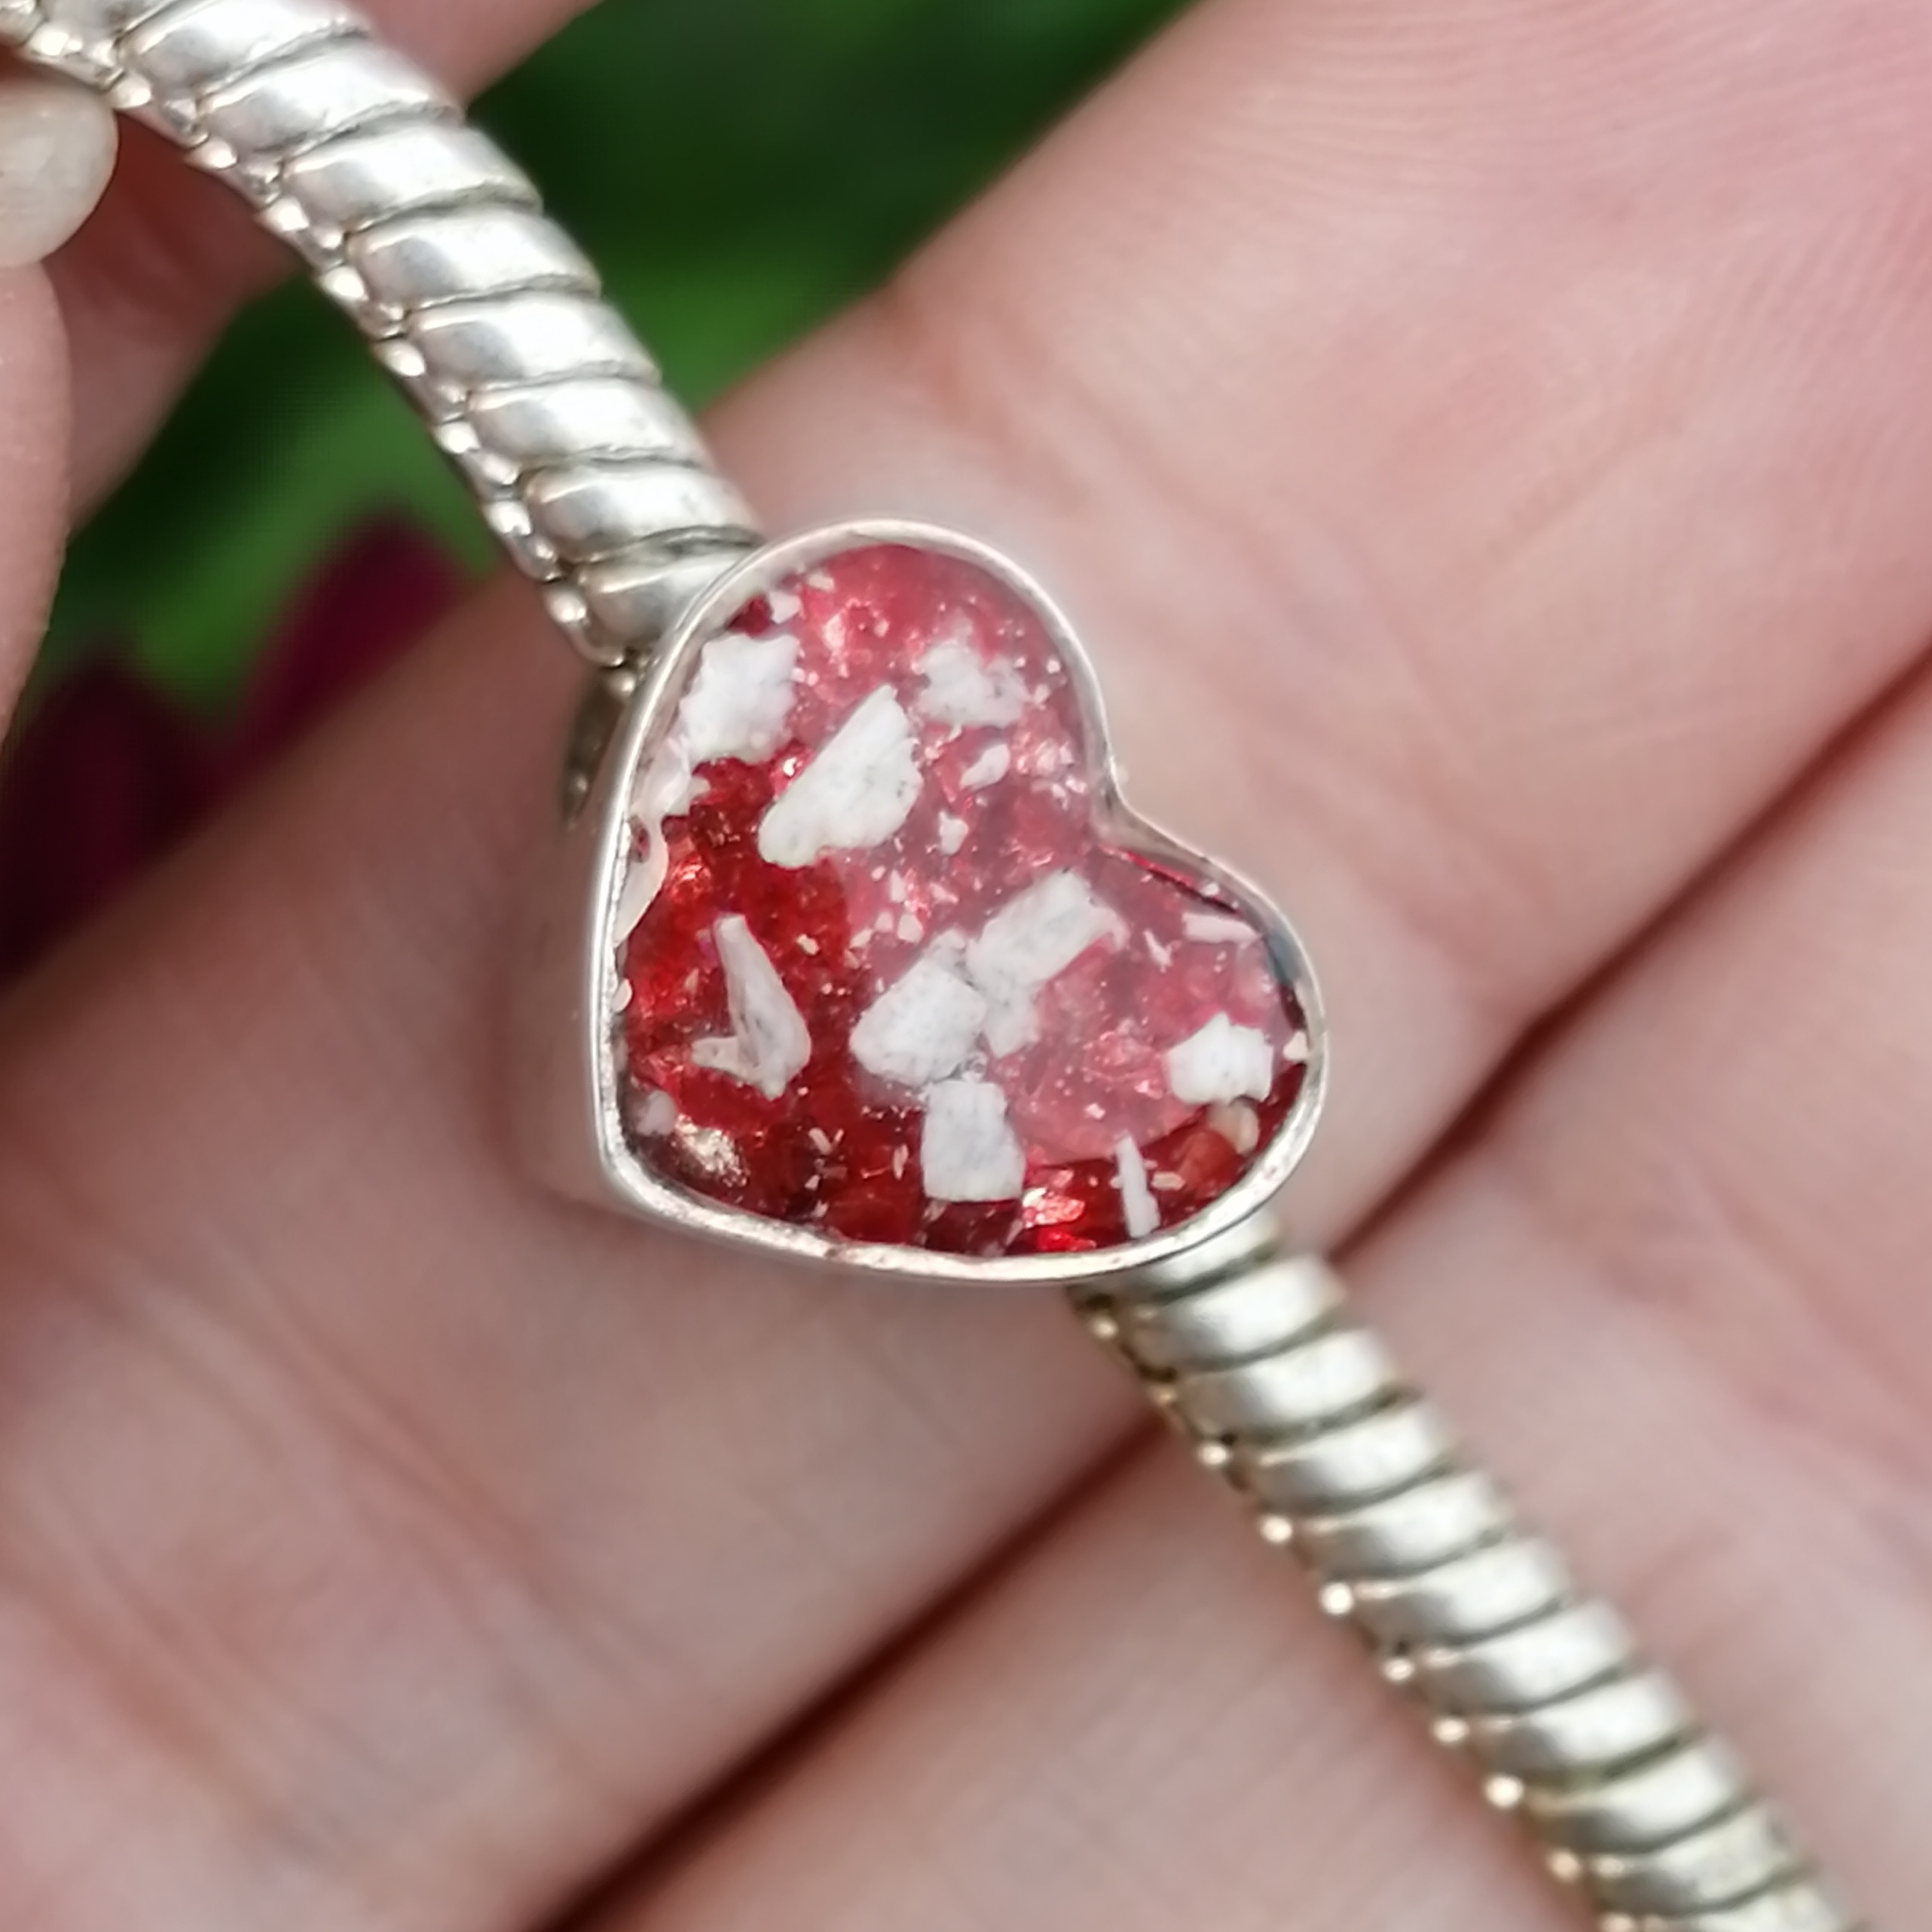 Ashes in Resin Silver heart bead (fits pandora)